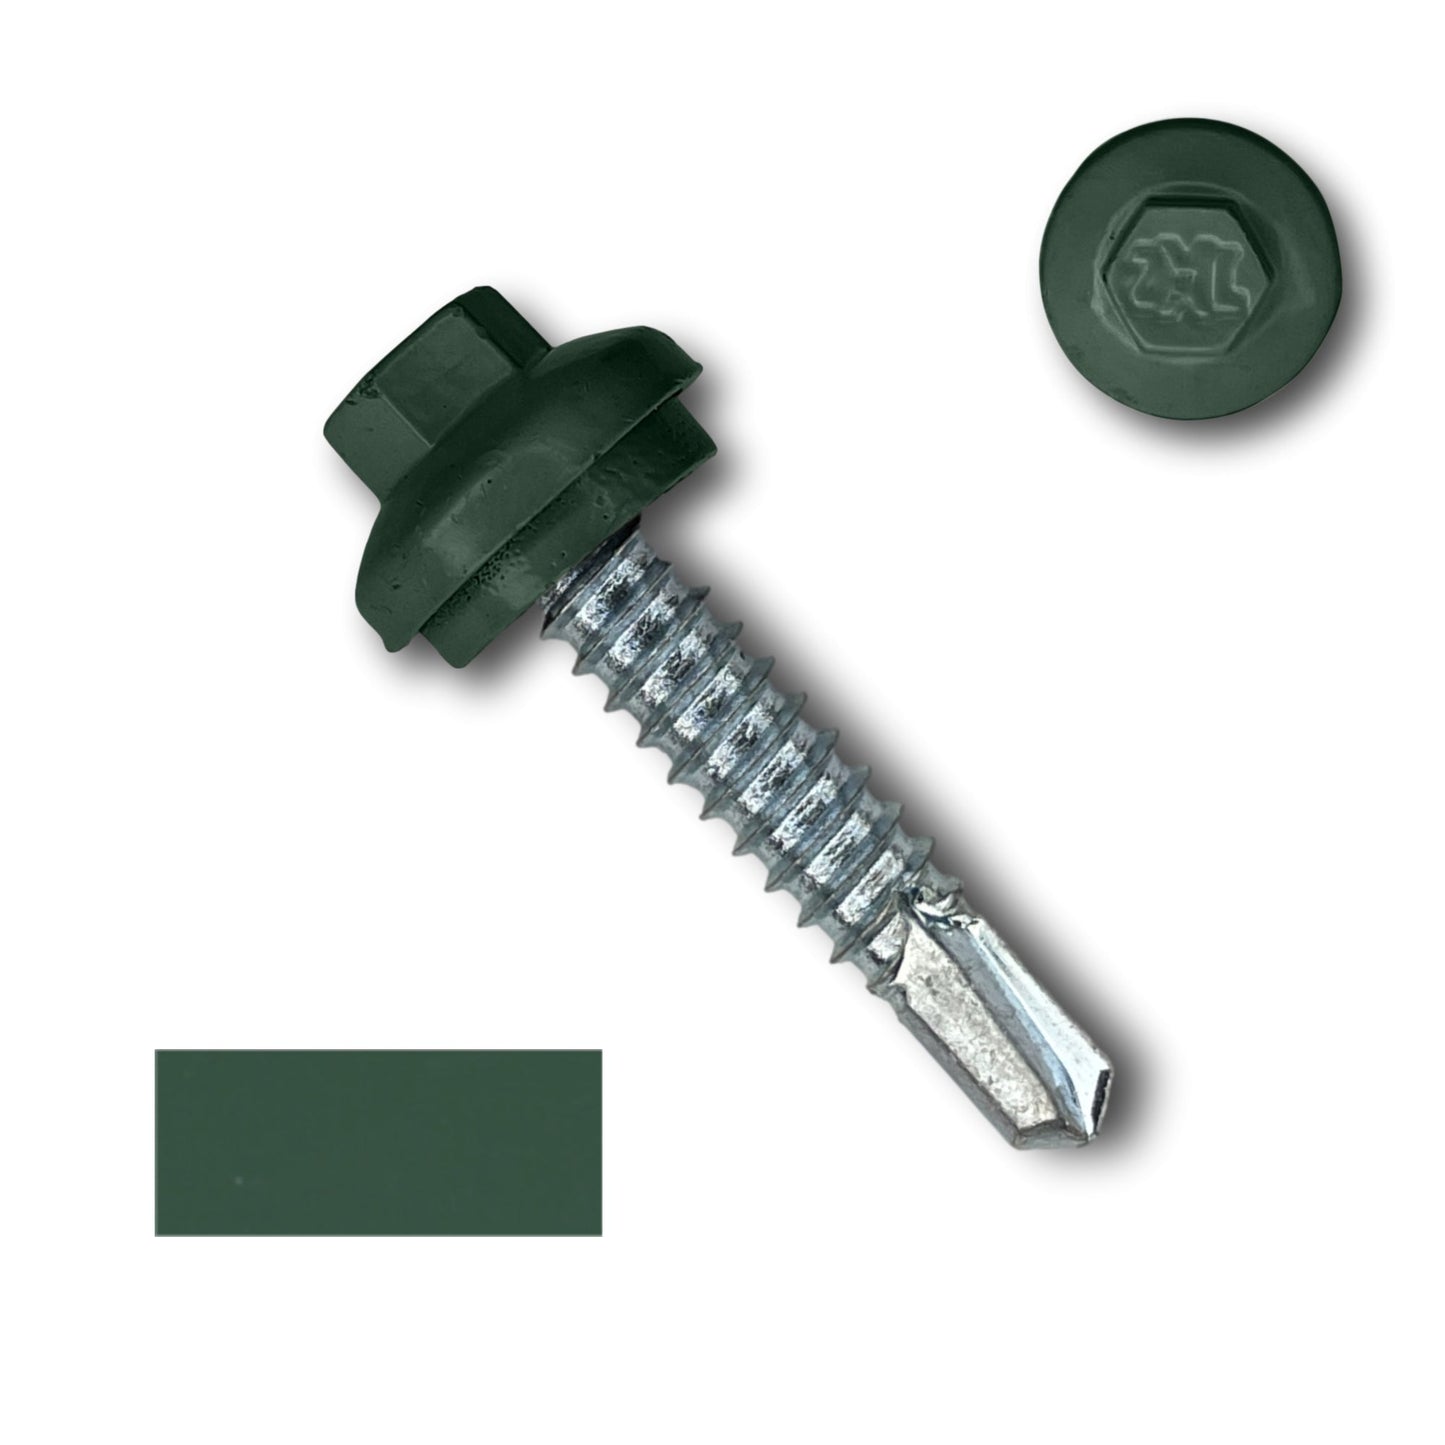 A detailed image of #14 x 1.25" ZXL Dome Cap Metal Building Screws (Metal-to-Metal), Self-Drilling - 250, 500, or 1000 Pack by Perma Cover with a green hexagonal head and a threaded metal body. A close-up of the screw head, often used in metal building screws, and a green color sample are displayed beside it.